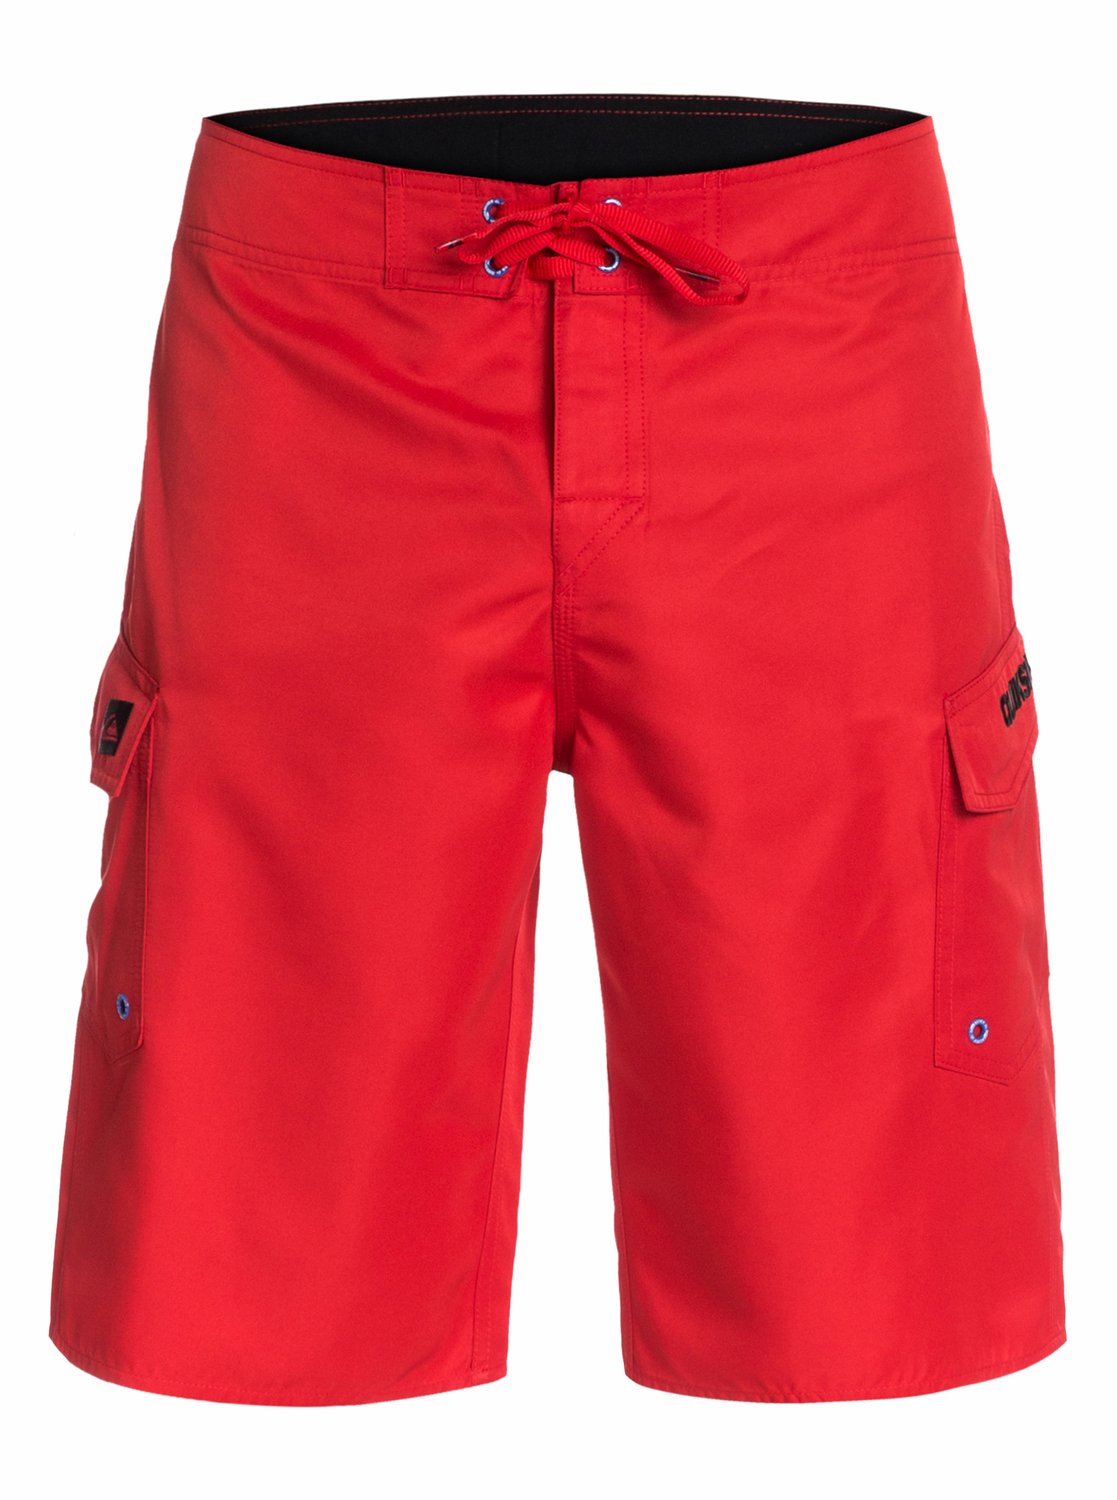 Quiksilver Manic 22" Boardshorts Men's - Red (RQR0)
 Quiksilver Shorts Red